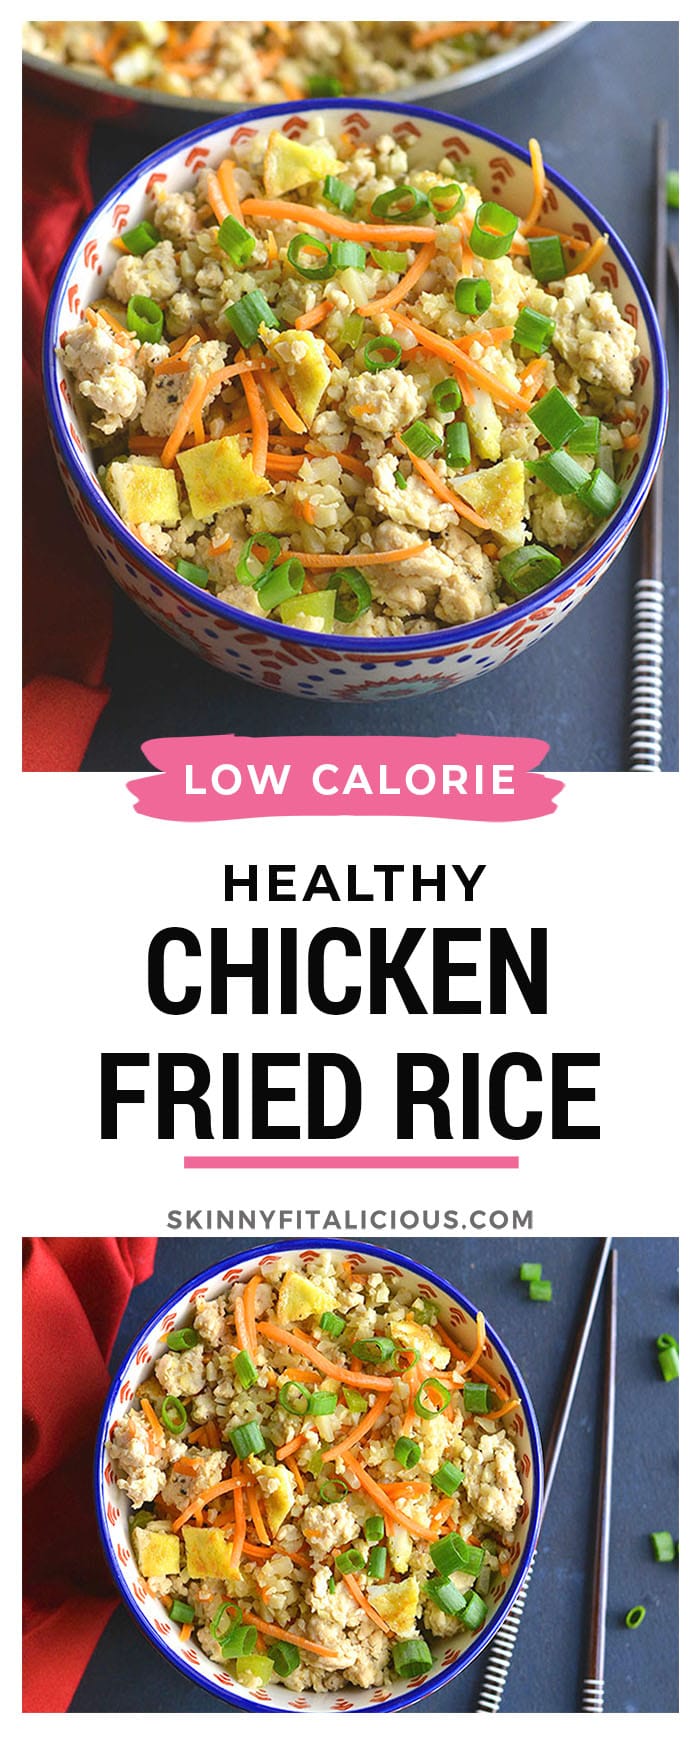 Chicken Cauliflower Fried Rice! Cauliflower rice replaces the grains in this low carb dish. Naturally gluten free, a good source of veggies and incredibly delicious!